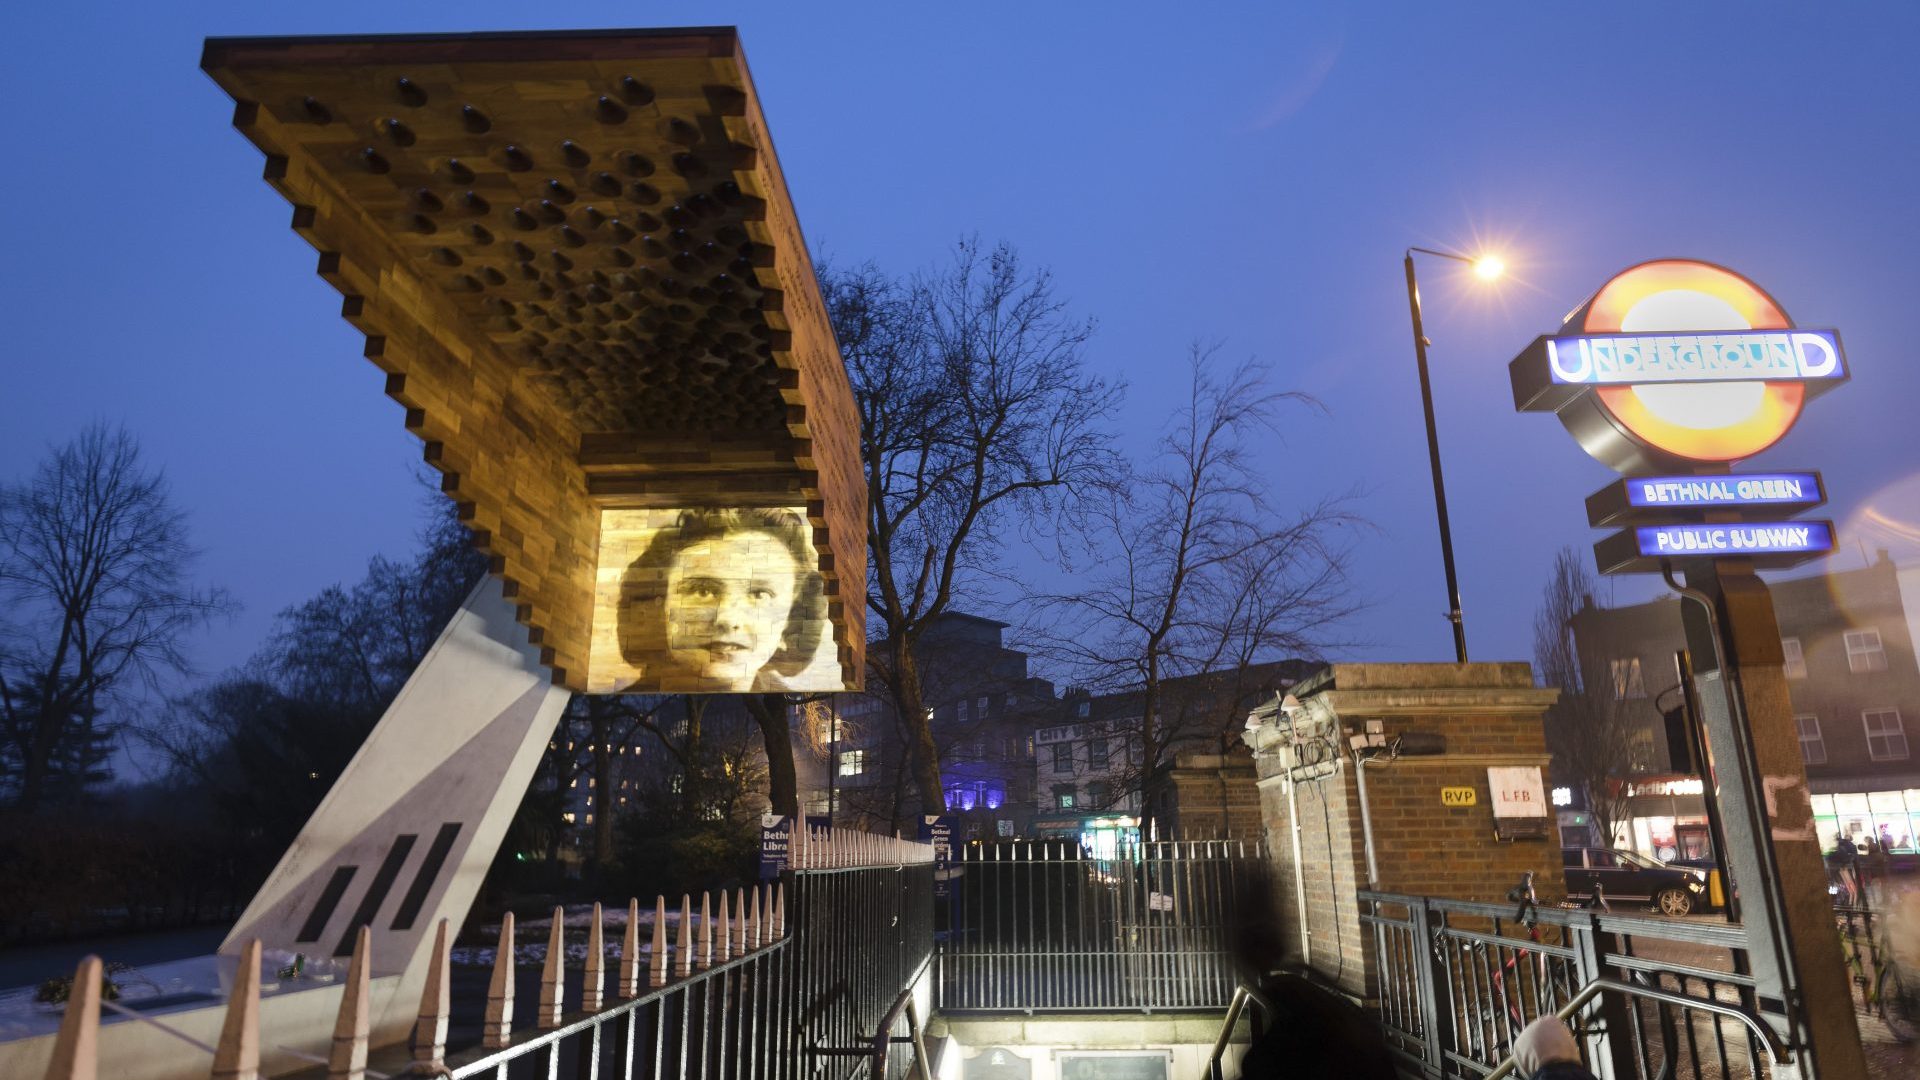 rojections of the victims of the Bethnal Green tube disaster are projected on to a memorial on the 75th anniversary of the disaster
The grandmother of Millie Bobby Brown, right, was a survivor. Photos: Vickie Flores/In Pictures; Jun Sato/WireImage/Getty